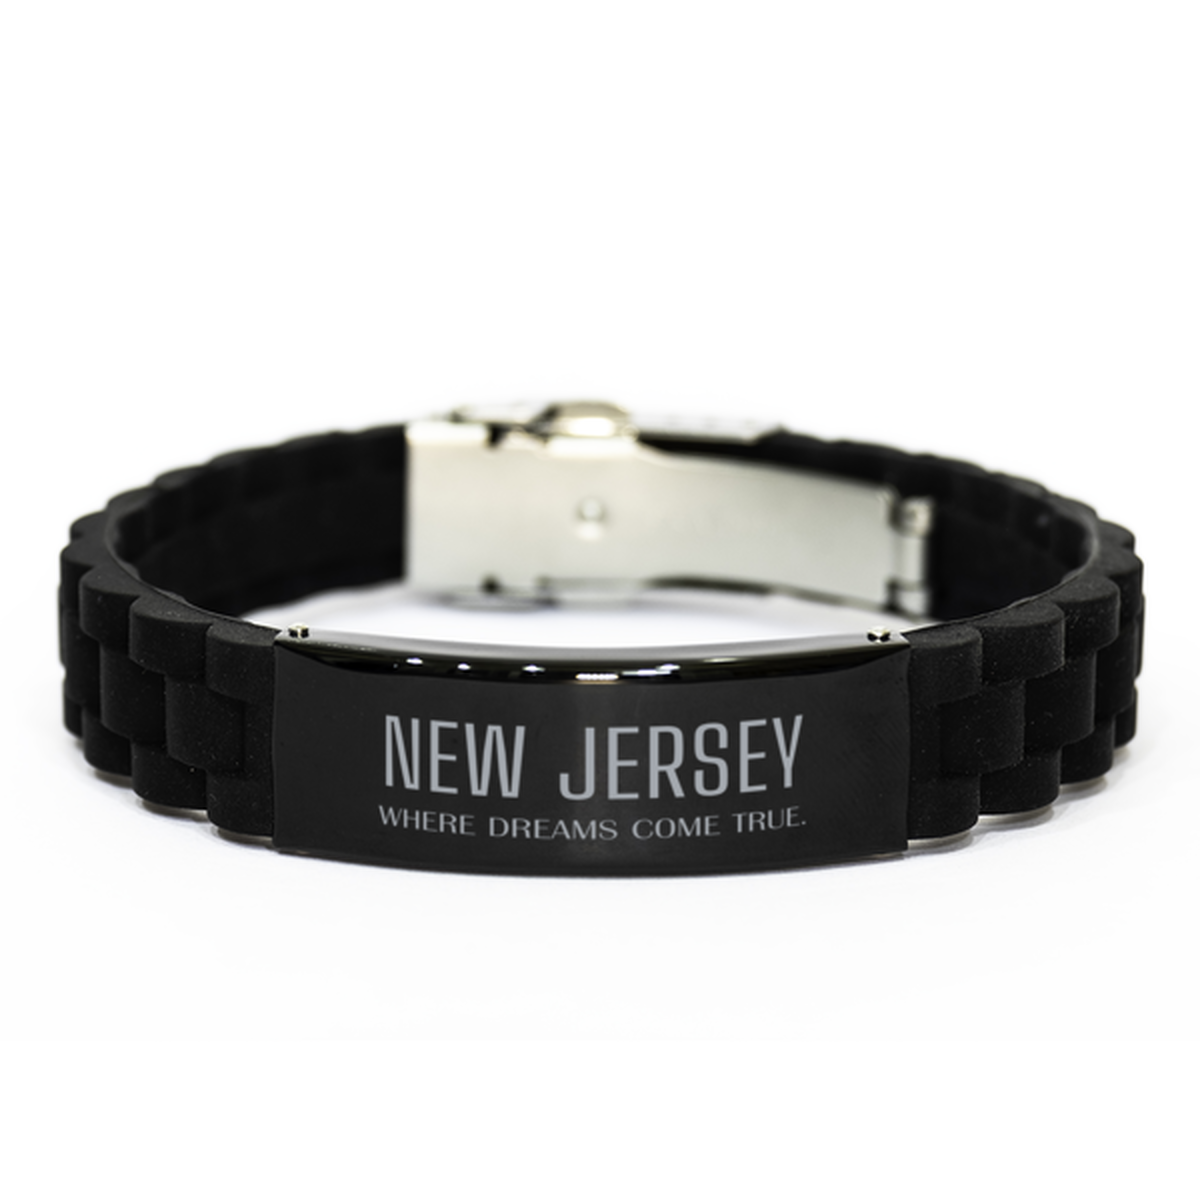 Love New Jersey State Black Glidelock Clasp Bracelet, New Jersey Where dreams come true, Birthday Inspirational Gifts For New Jersey Men, Women, Friends